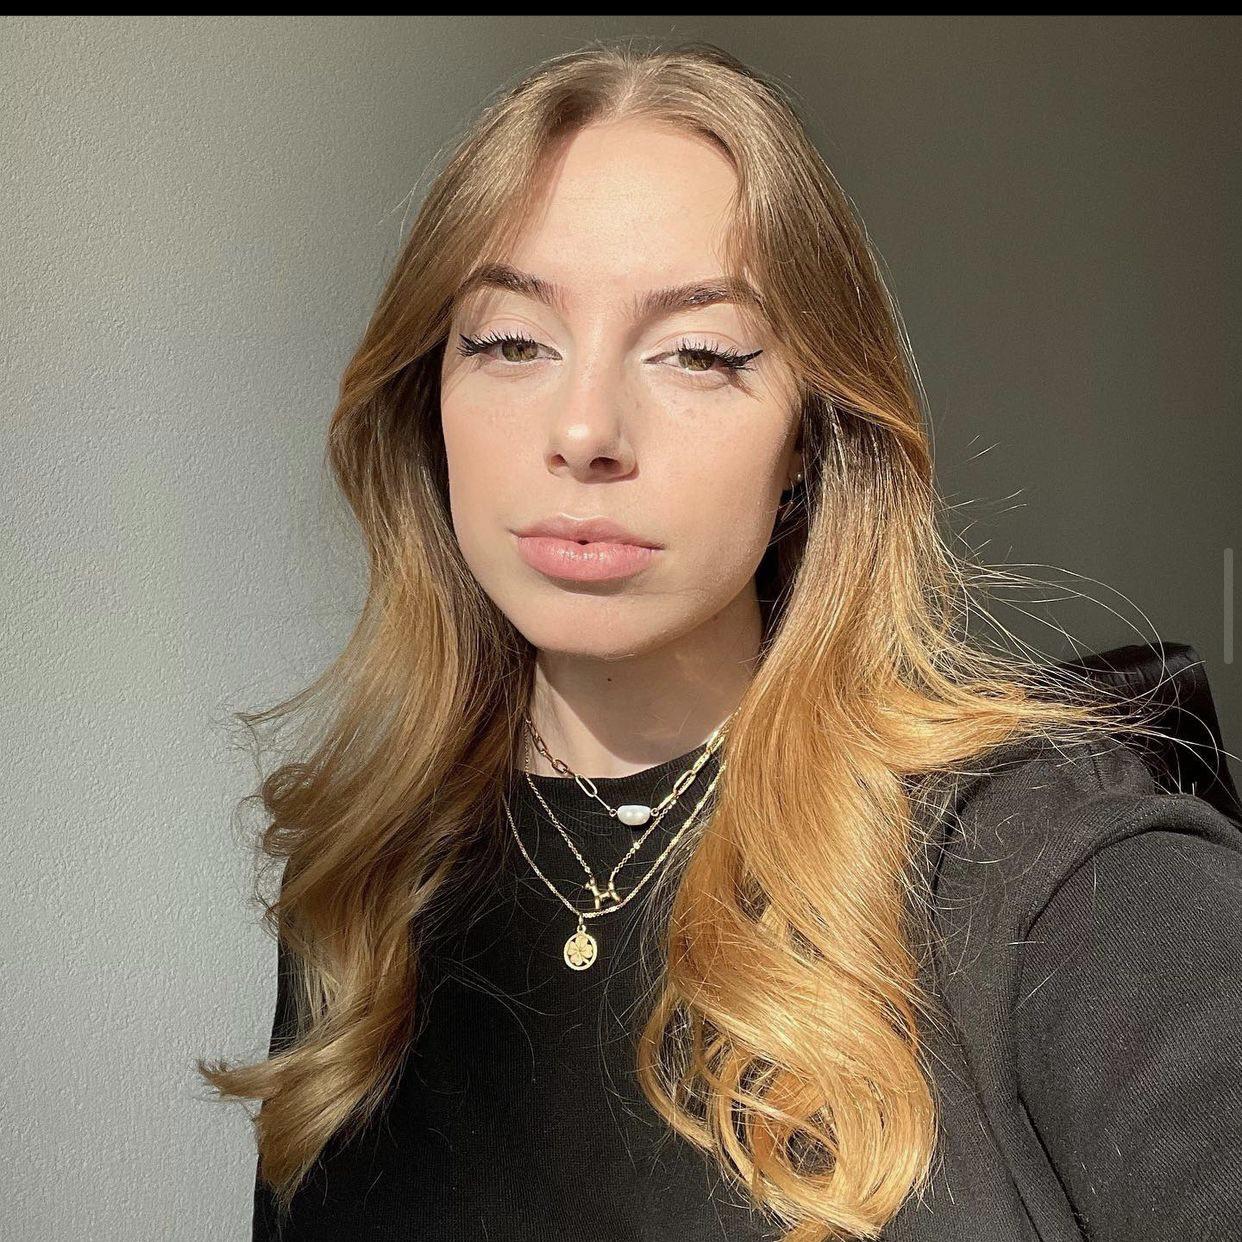 Her Face Would Look So Good Dripping With Cum Scrolller 0309